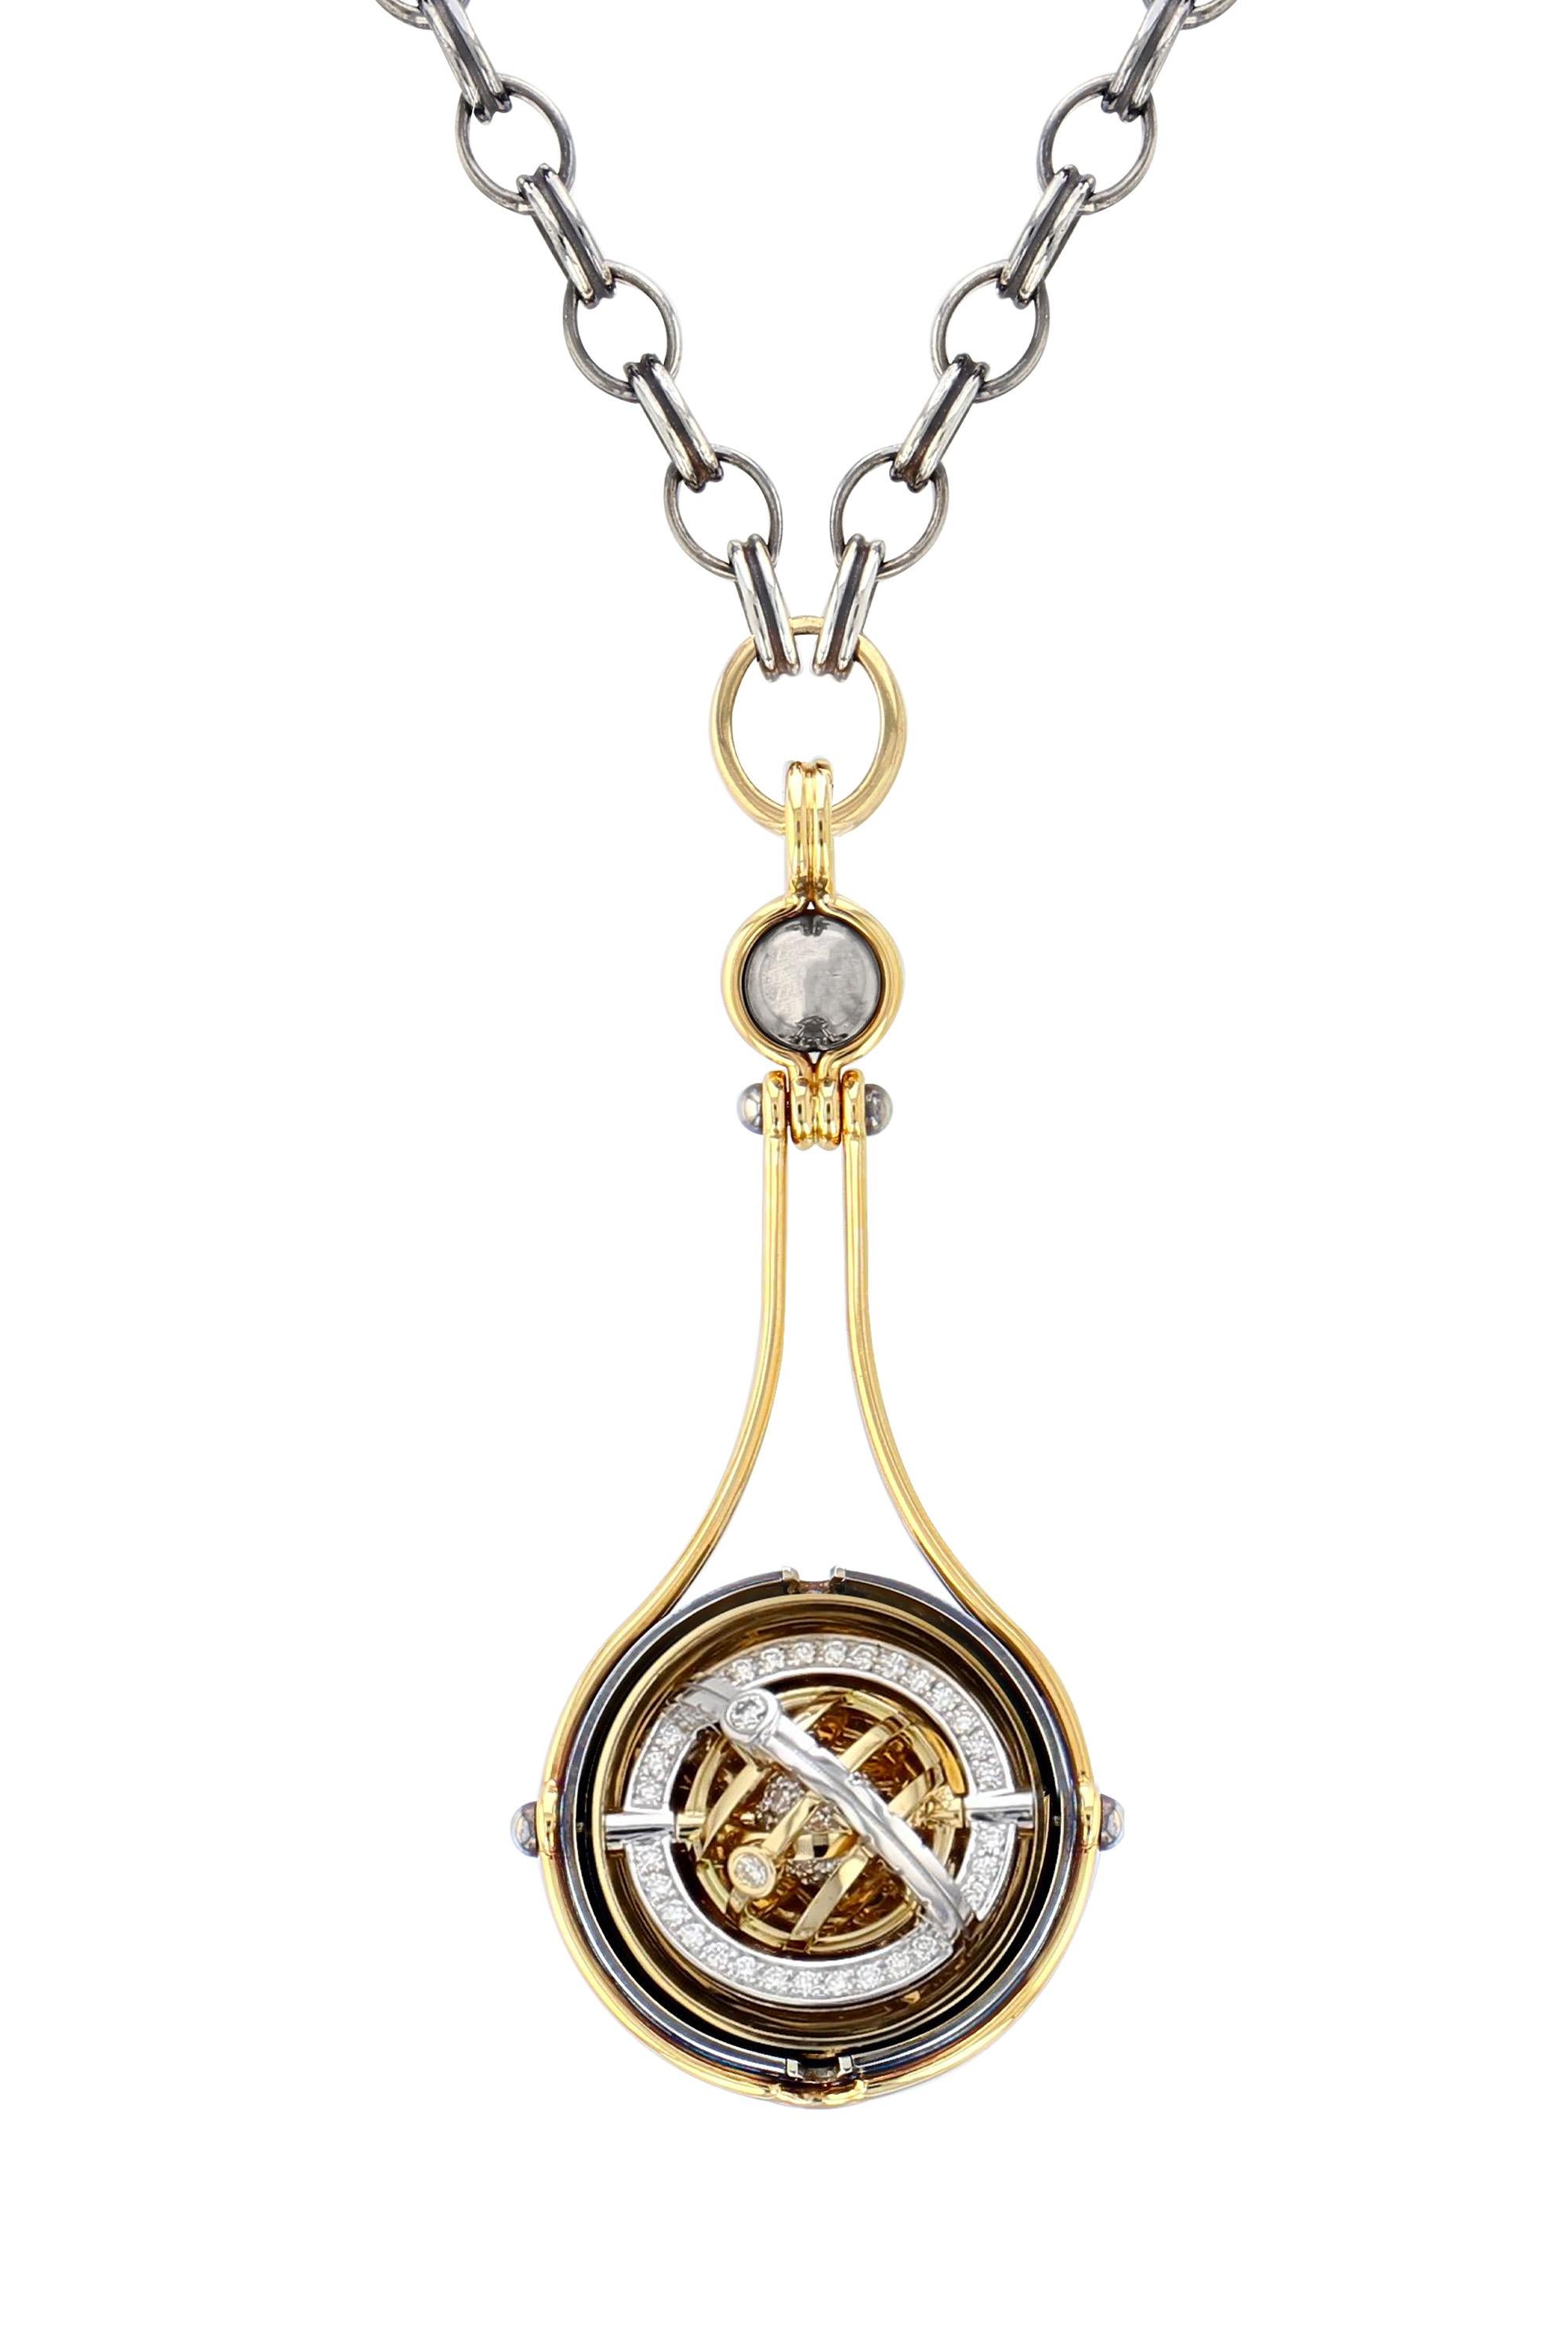 Yellow gold and distressed silver pendant. Rotating sphere revealing a planet of diamonds encircled by a set of mobile rings in yellow and white gold, set with diamonds.

Distressed silver chain.

Details:
Diamonds : 1.7 cts 
18k Yellow Gold : 50